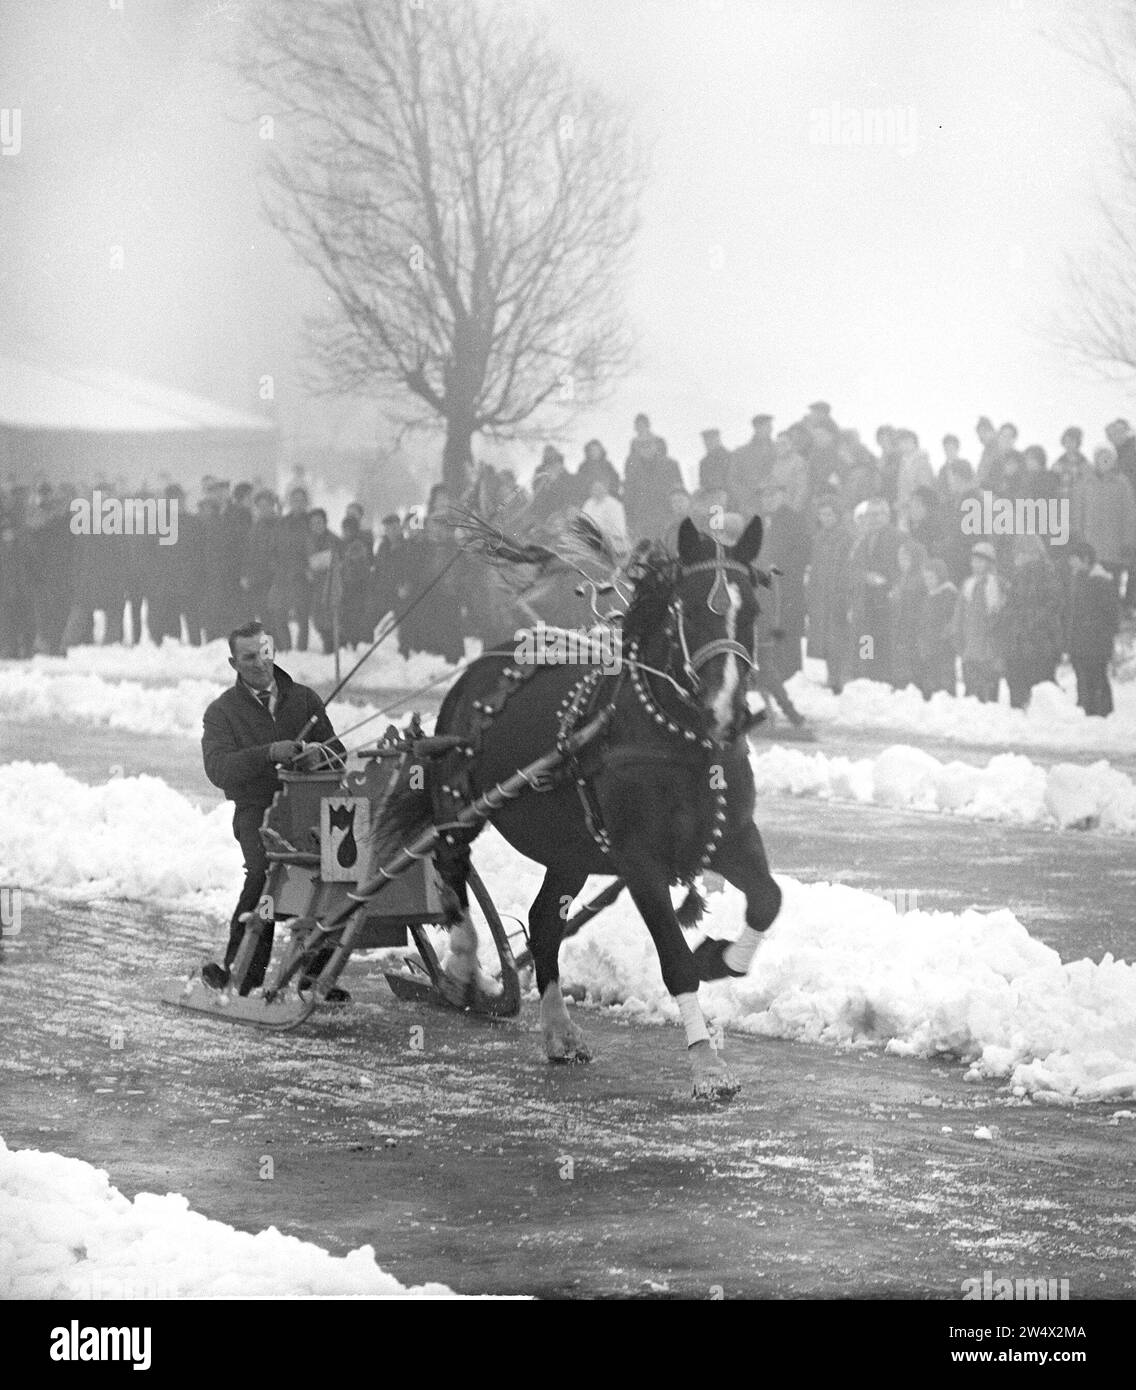 New Year's Eve harness racing in Akkrum, Poelsma with Johnny from Leeuwarden ca. January 6, 1963 Stock Photo